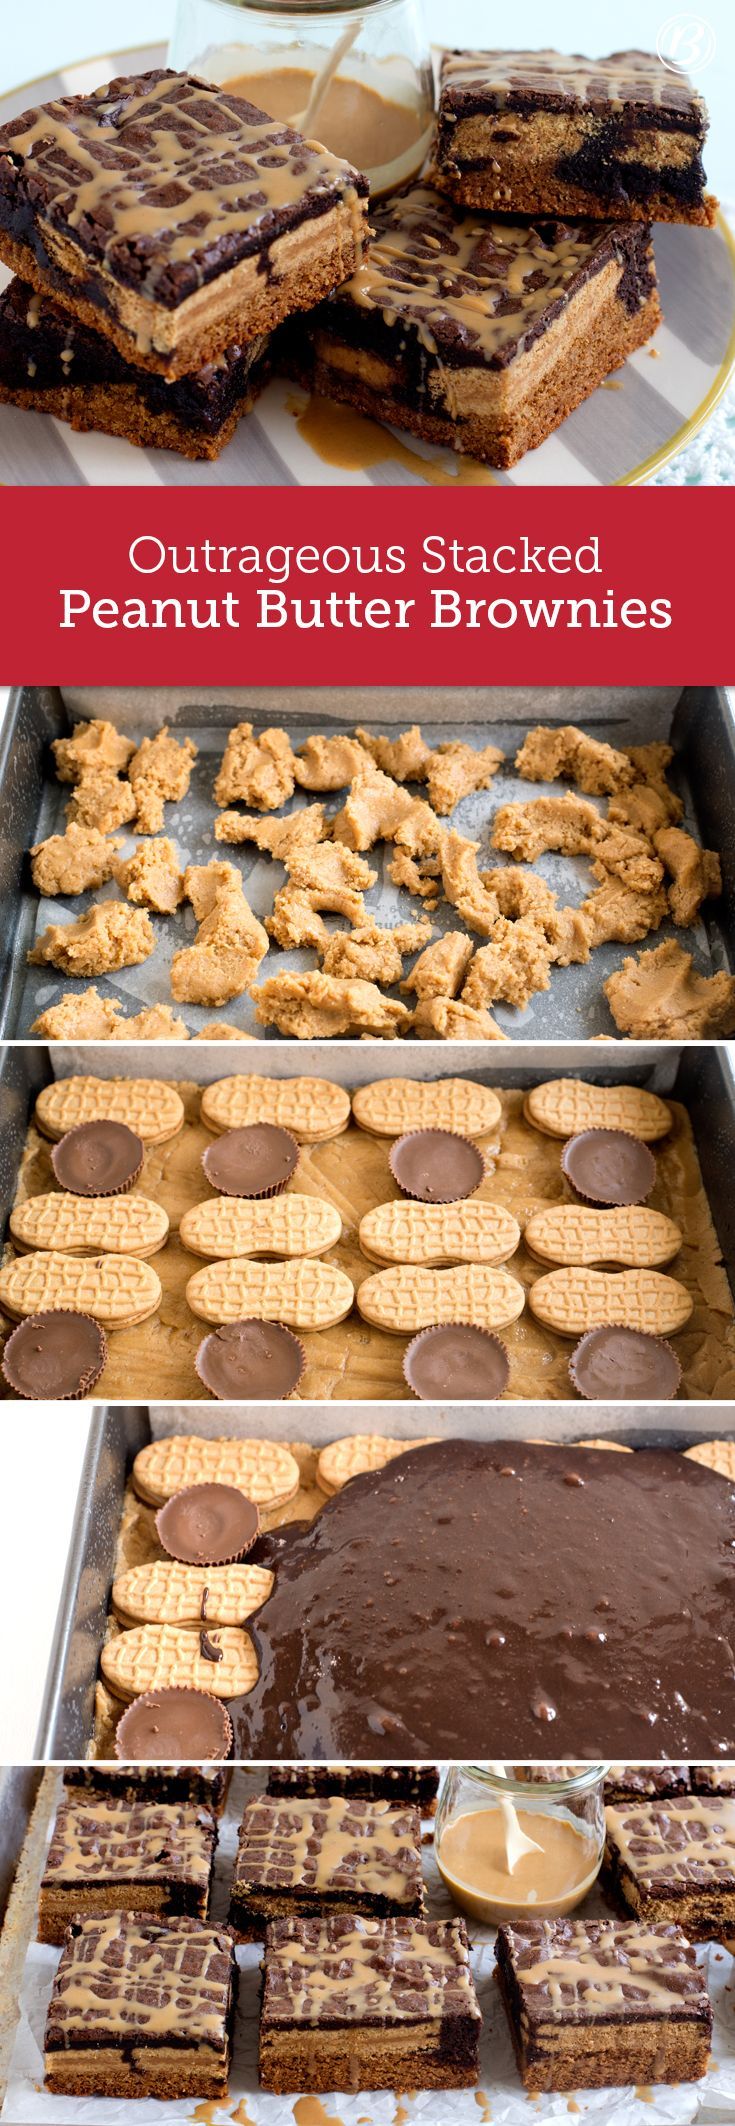 This decadent dessert is loaded with peanut butter cookie dough, peanut butter sandwich cookies, Reese’s peanut butter cups and